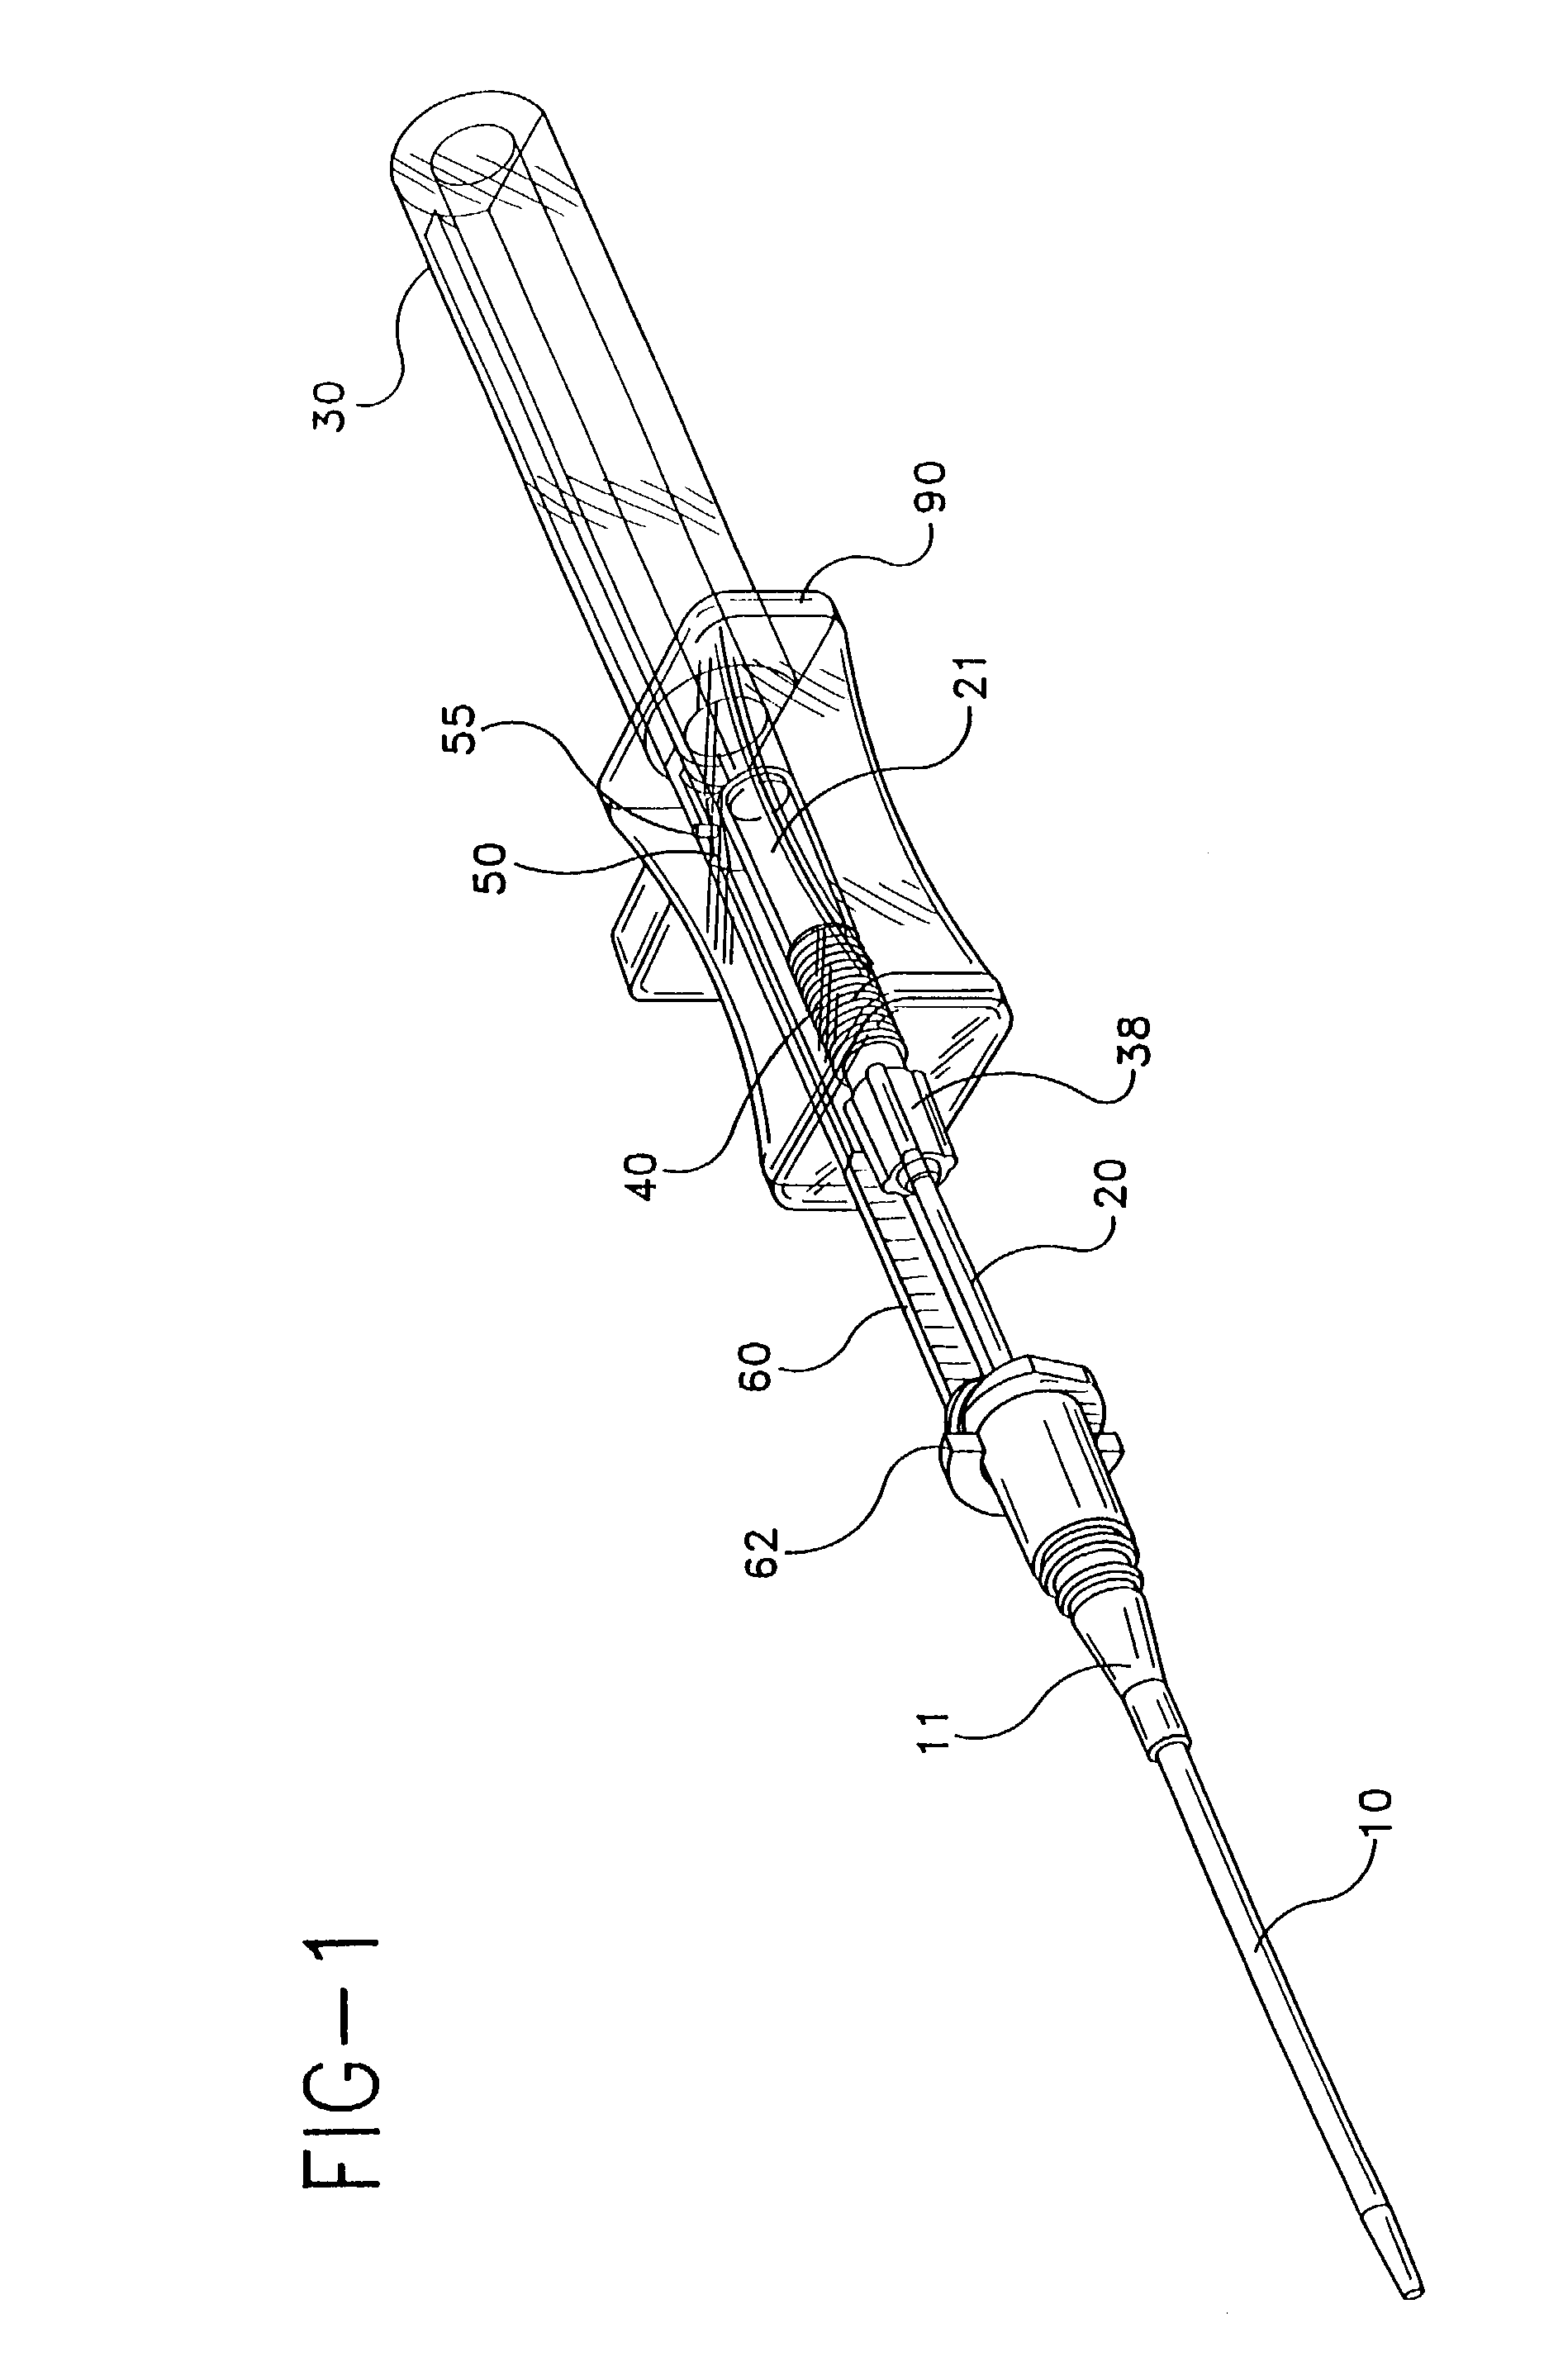 Catheter-advancement actuated needle retraction system